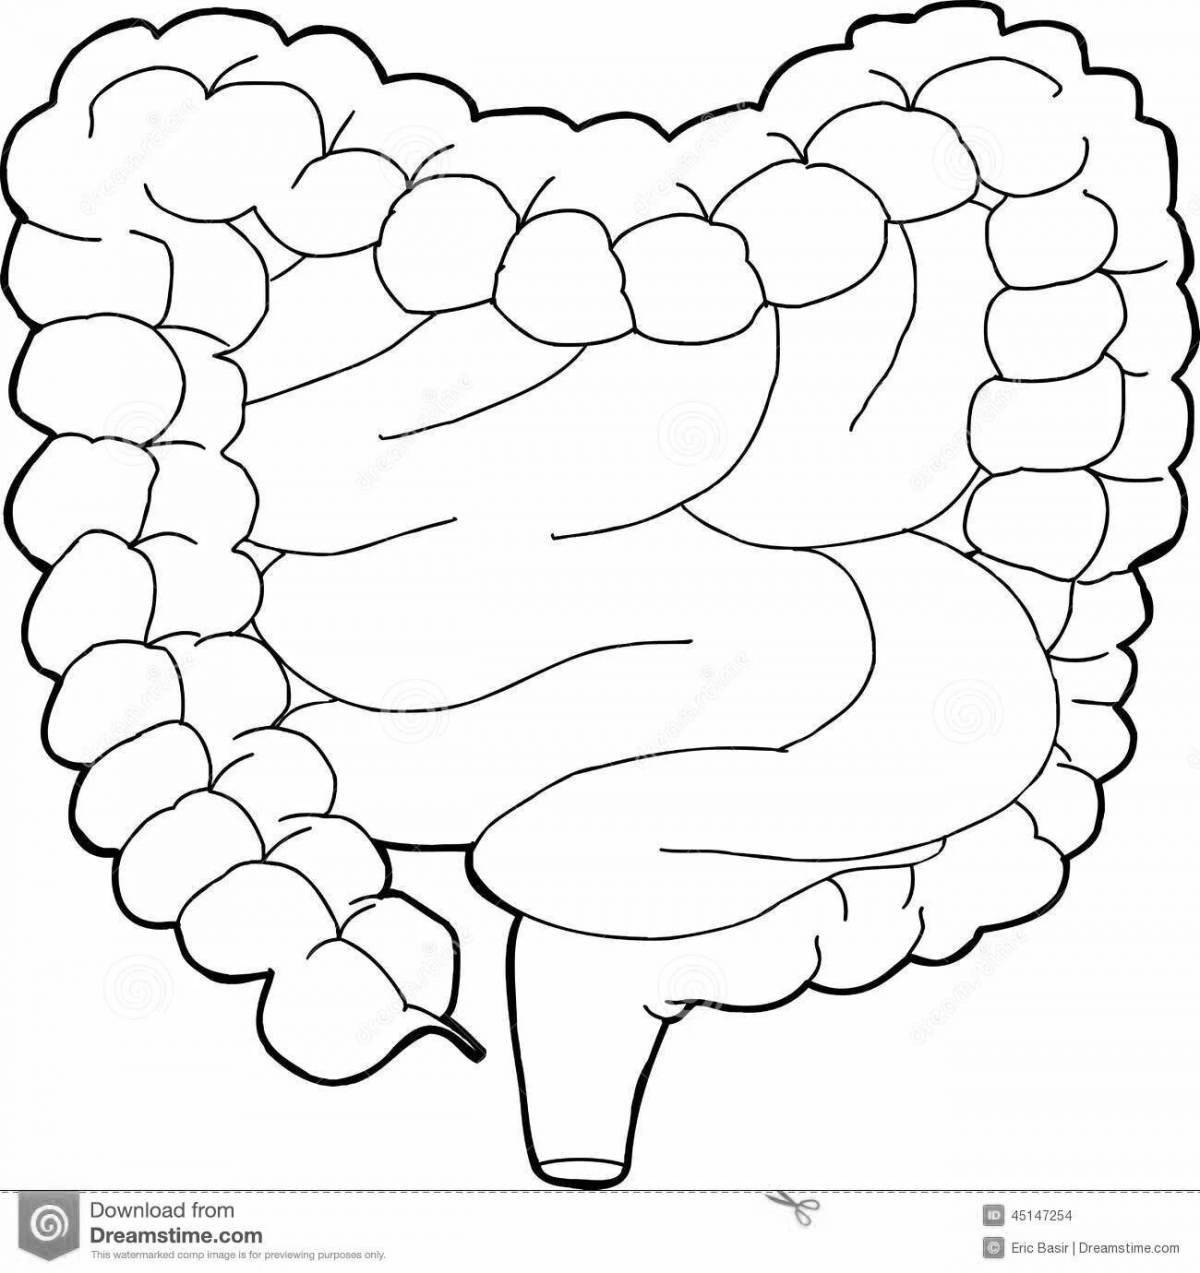 Tempting coloring of the human intestine